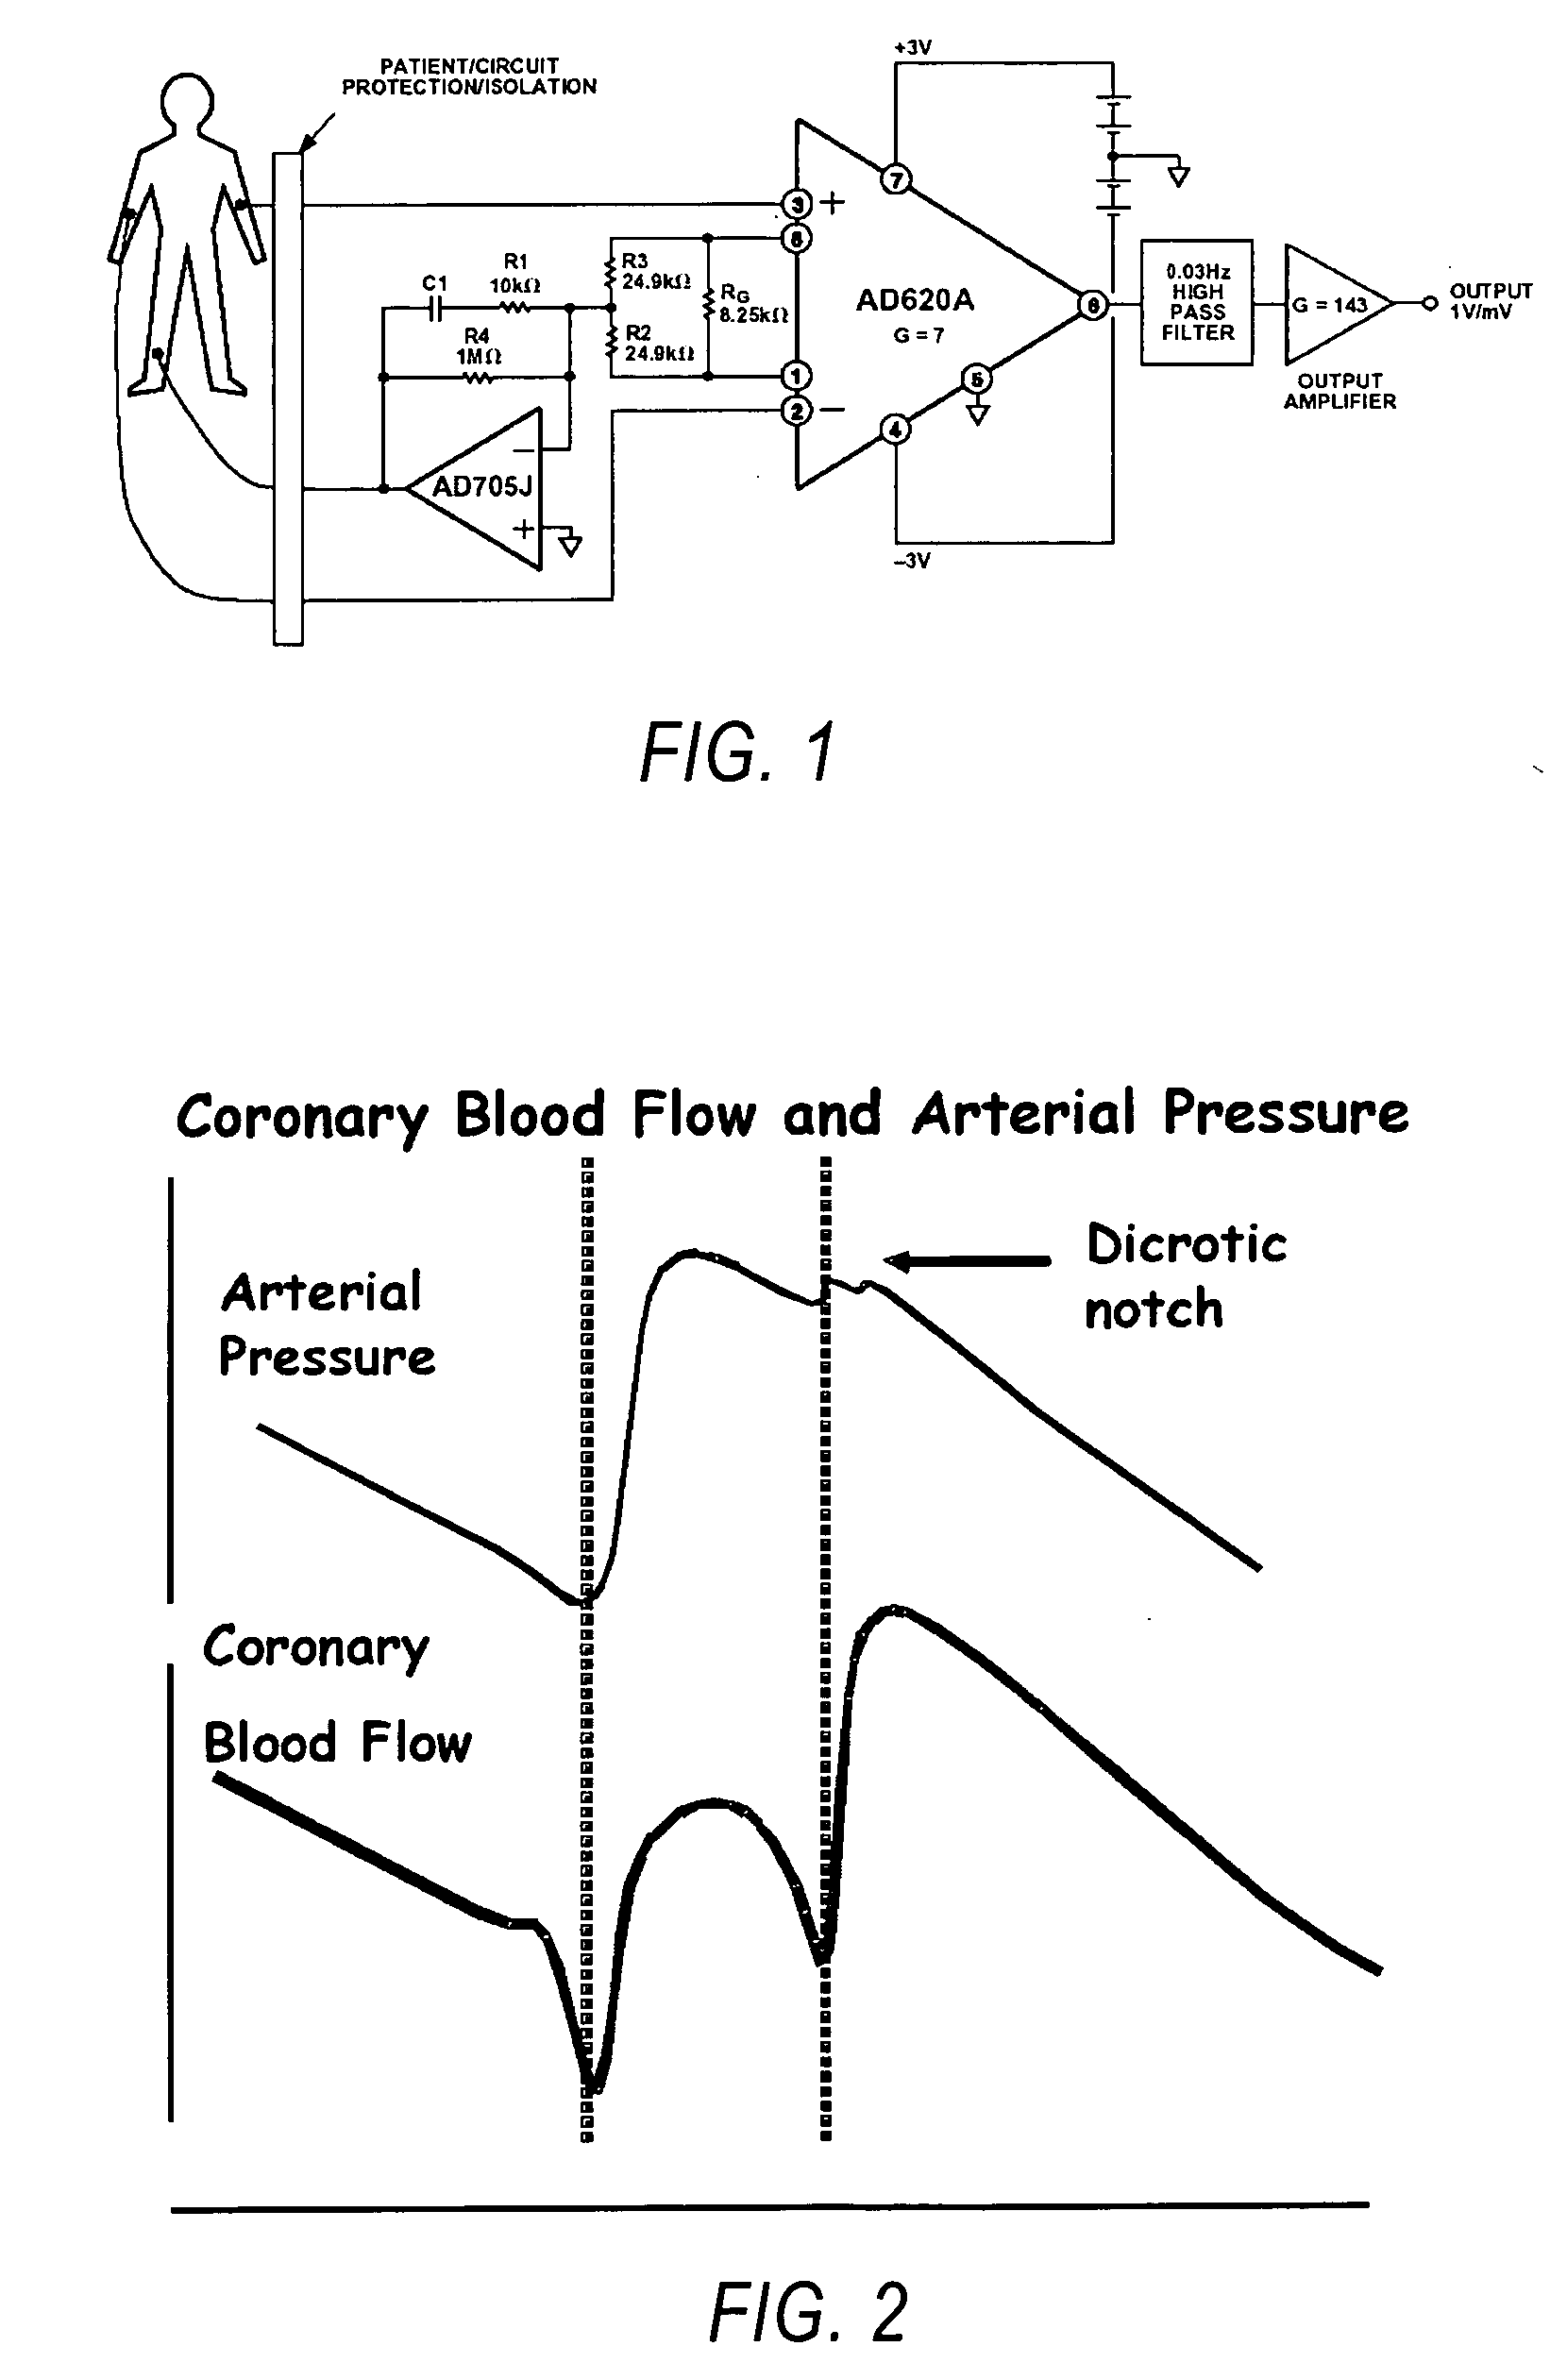 Methods and systems for gated or pulsed application of ablative energy in the treatment of cardiac disorders